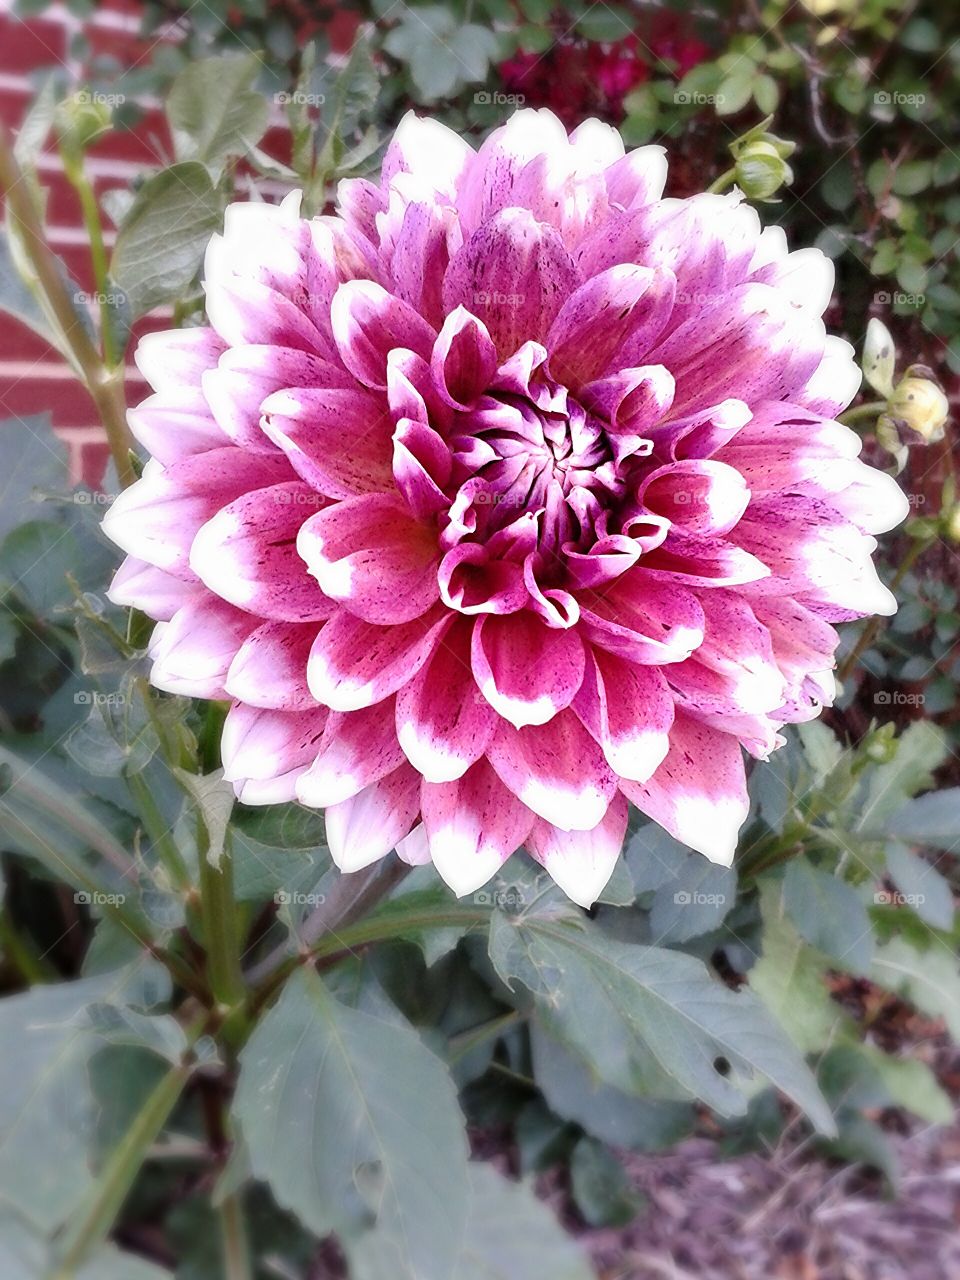 Dinner plate Dahlia. Large and in charge in my neighbor's garden.